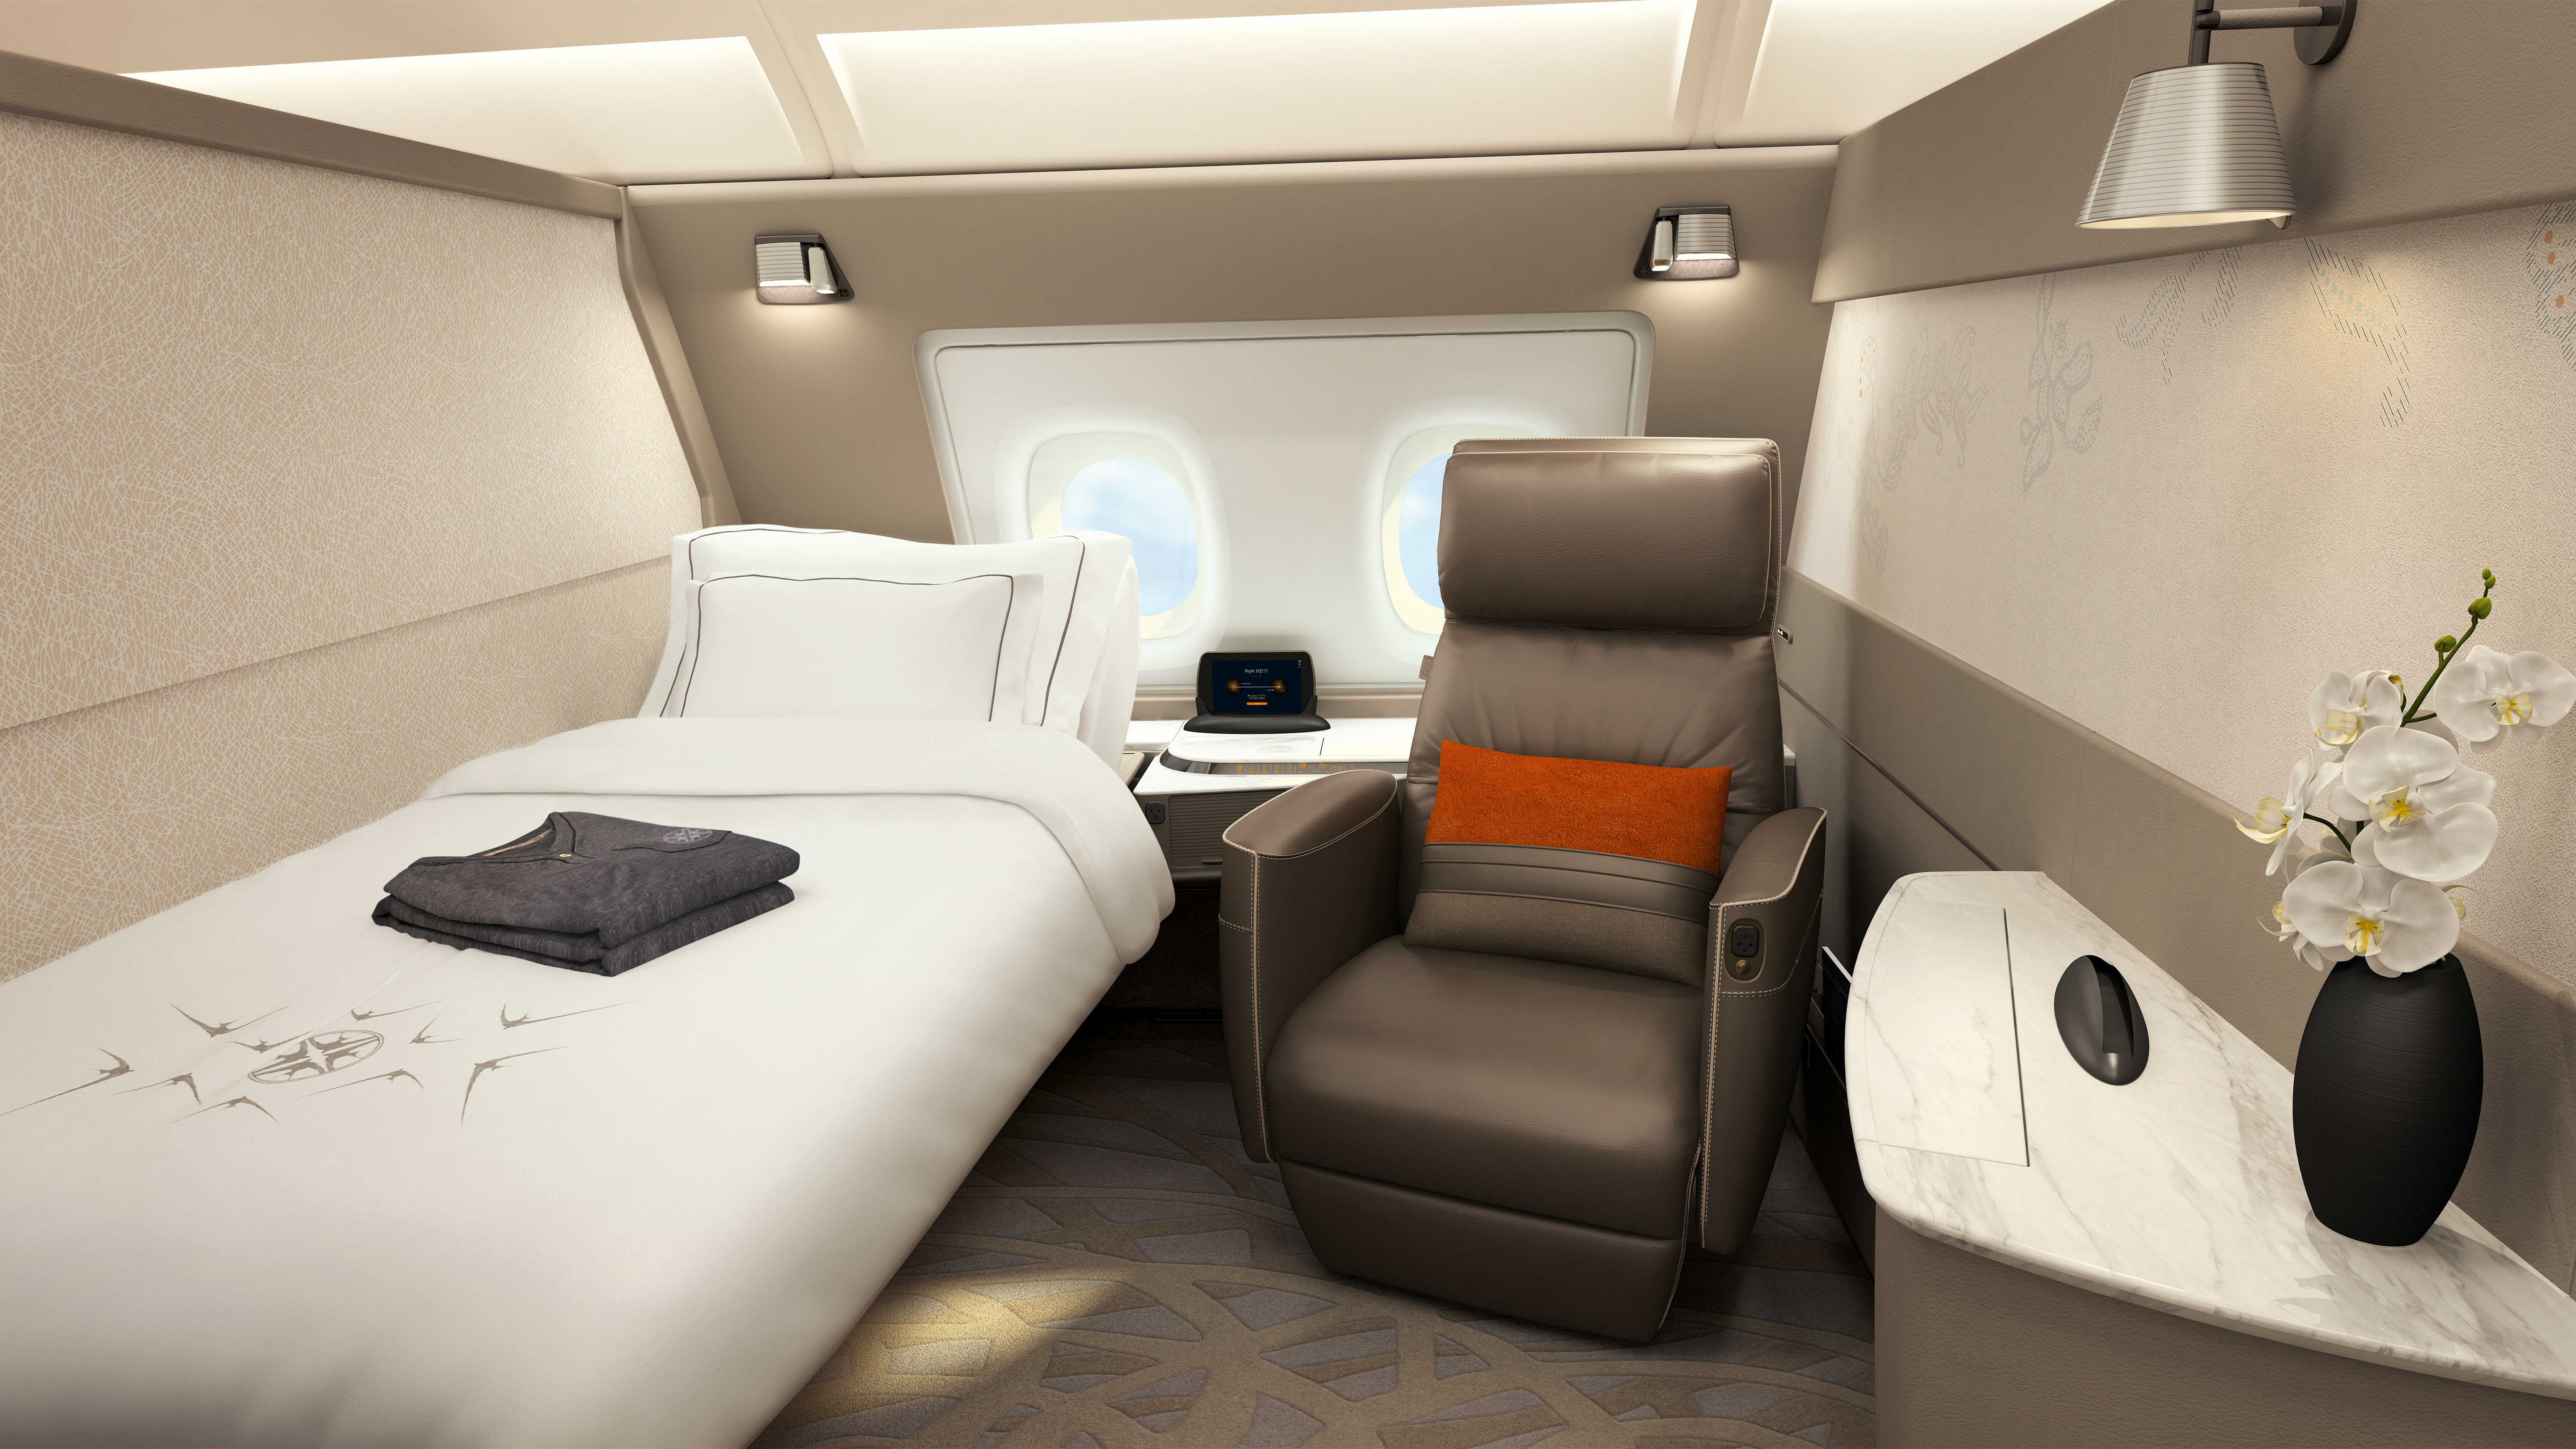 Earn more Membership Rewards with the Blue Business Plus and redeem them for Singapore Airlines magnificent first class